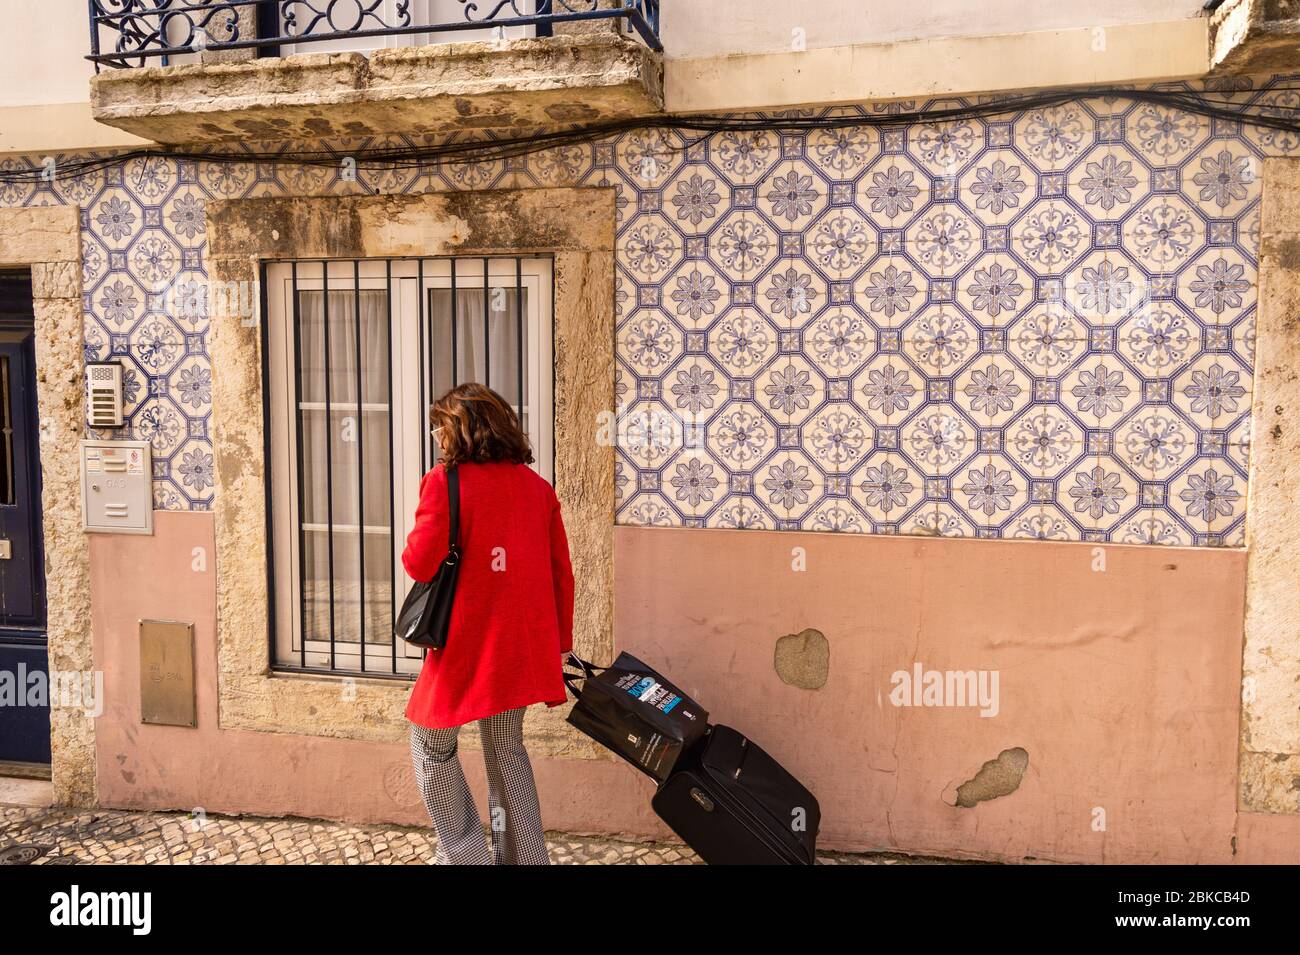 Lisbon, Portugal - 8 March 2020: Tourist with luggage walking in front of traditional portuguese decorative tiles azulejos Stock Photo